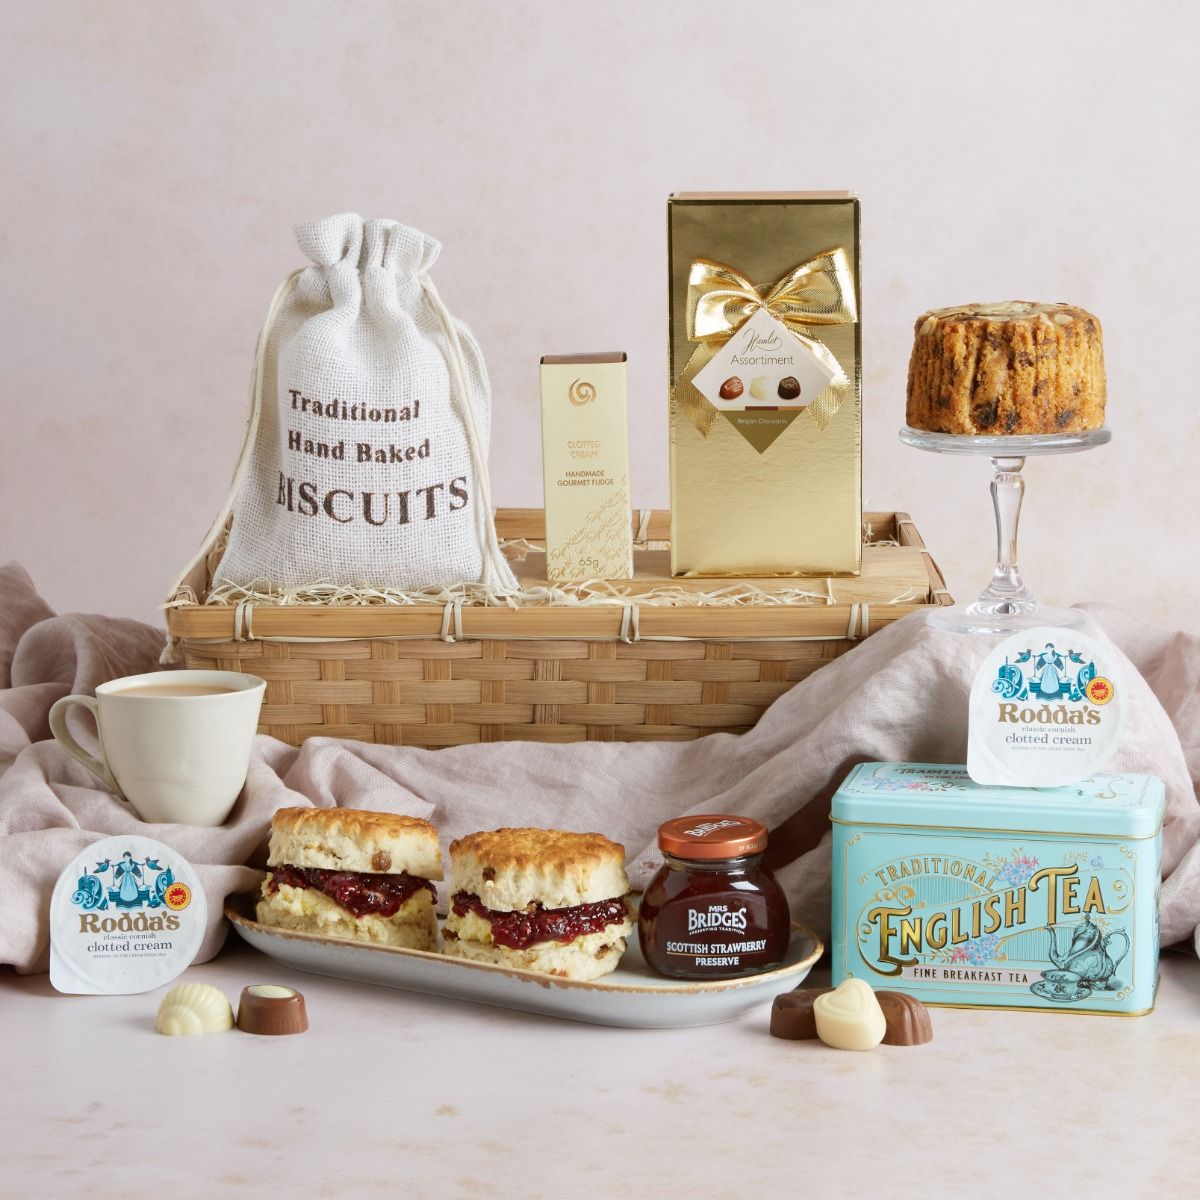 Luxury Cream Tea Gift Hamper with contents on display and willow basket